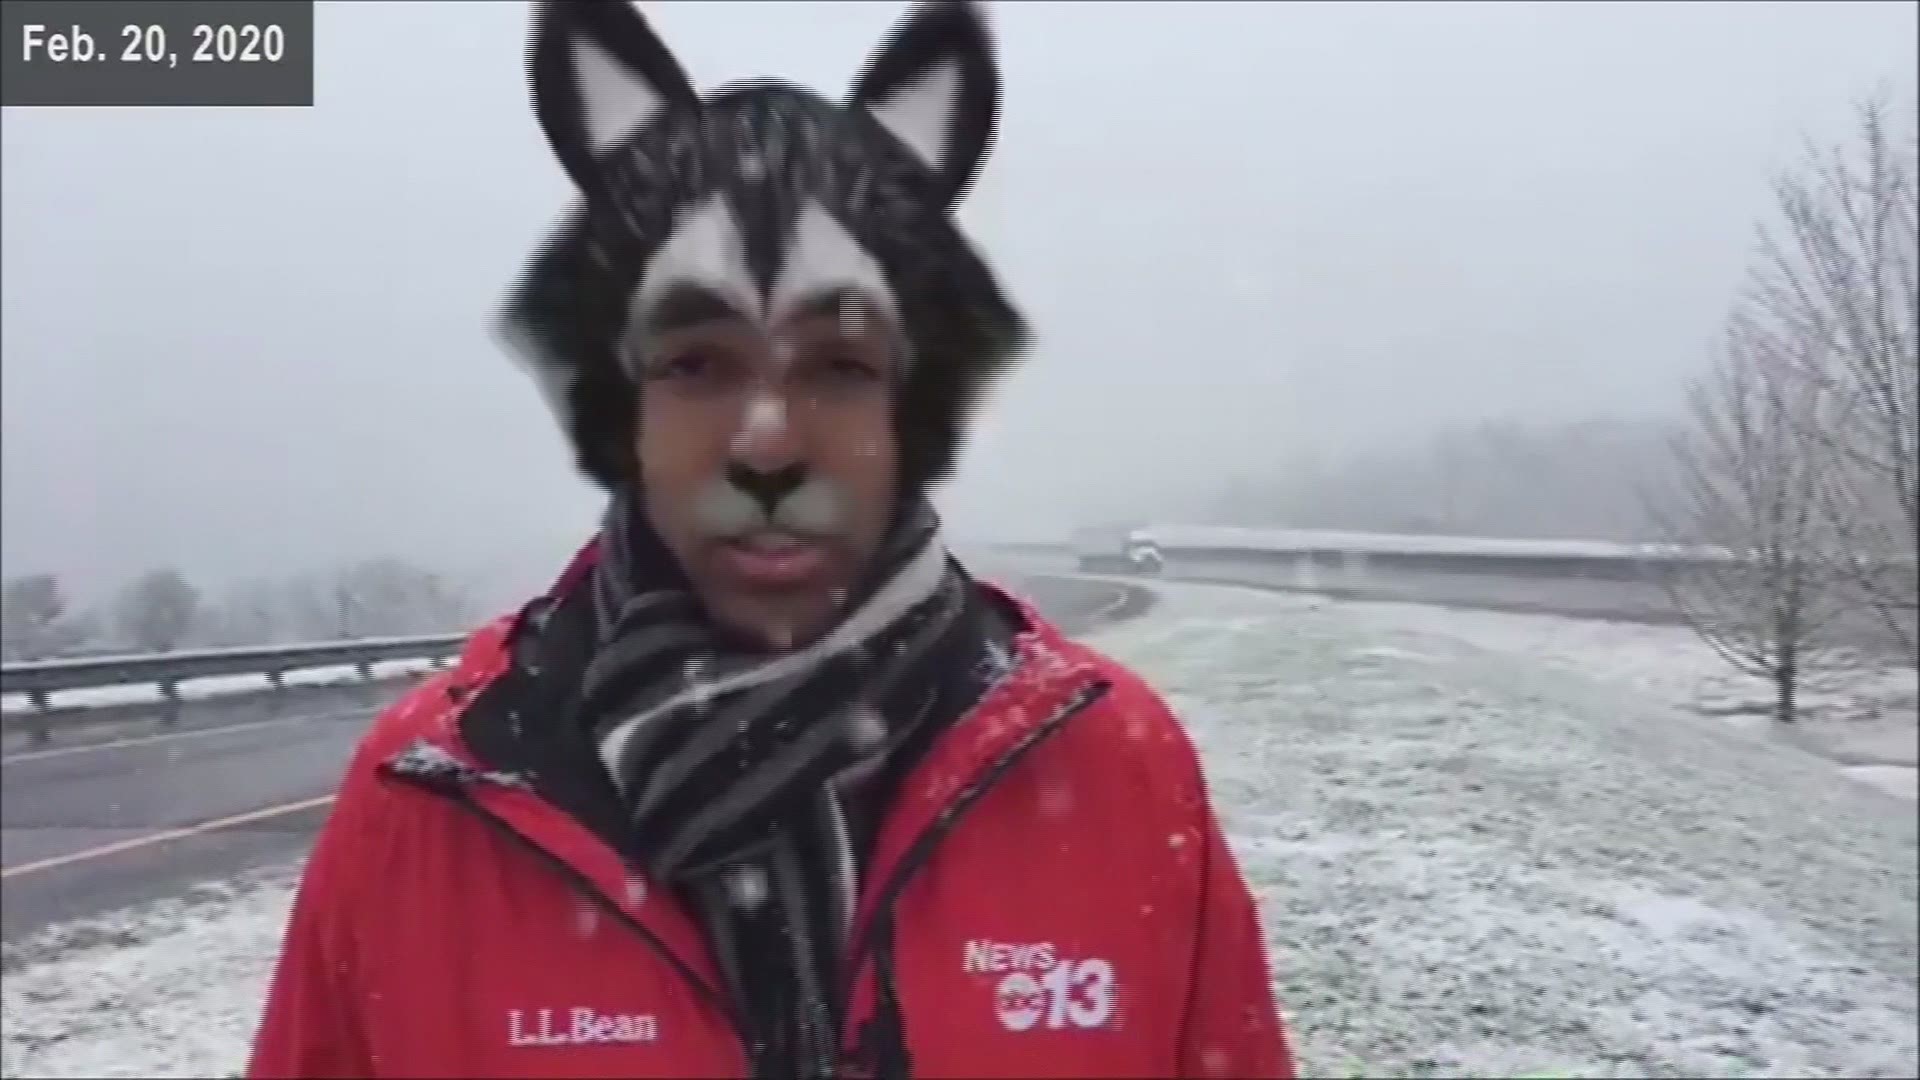 A North Carolina reporter gave online viewers a hilarious weather report last week.